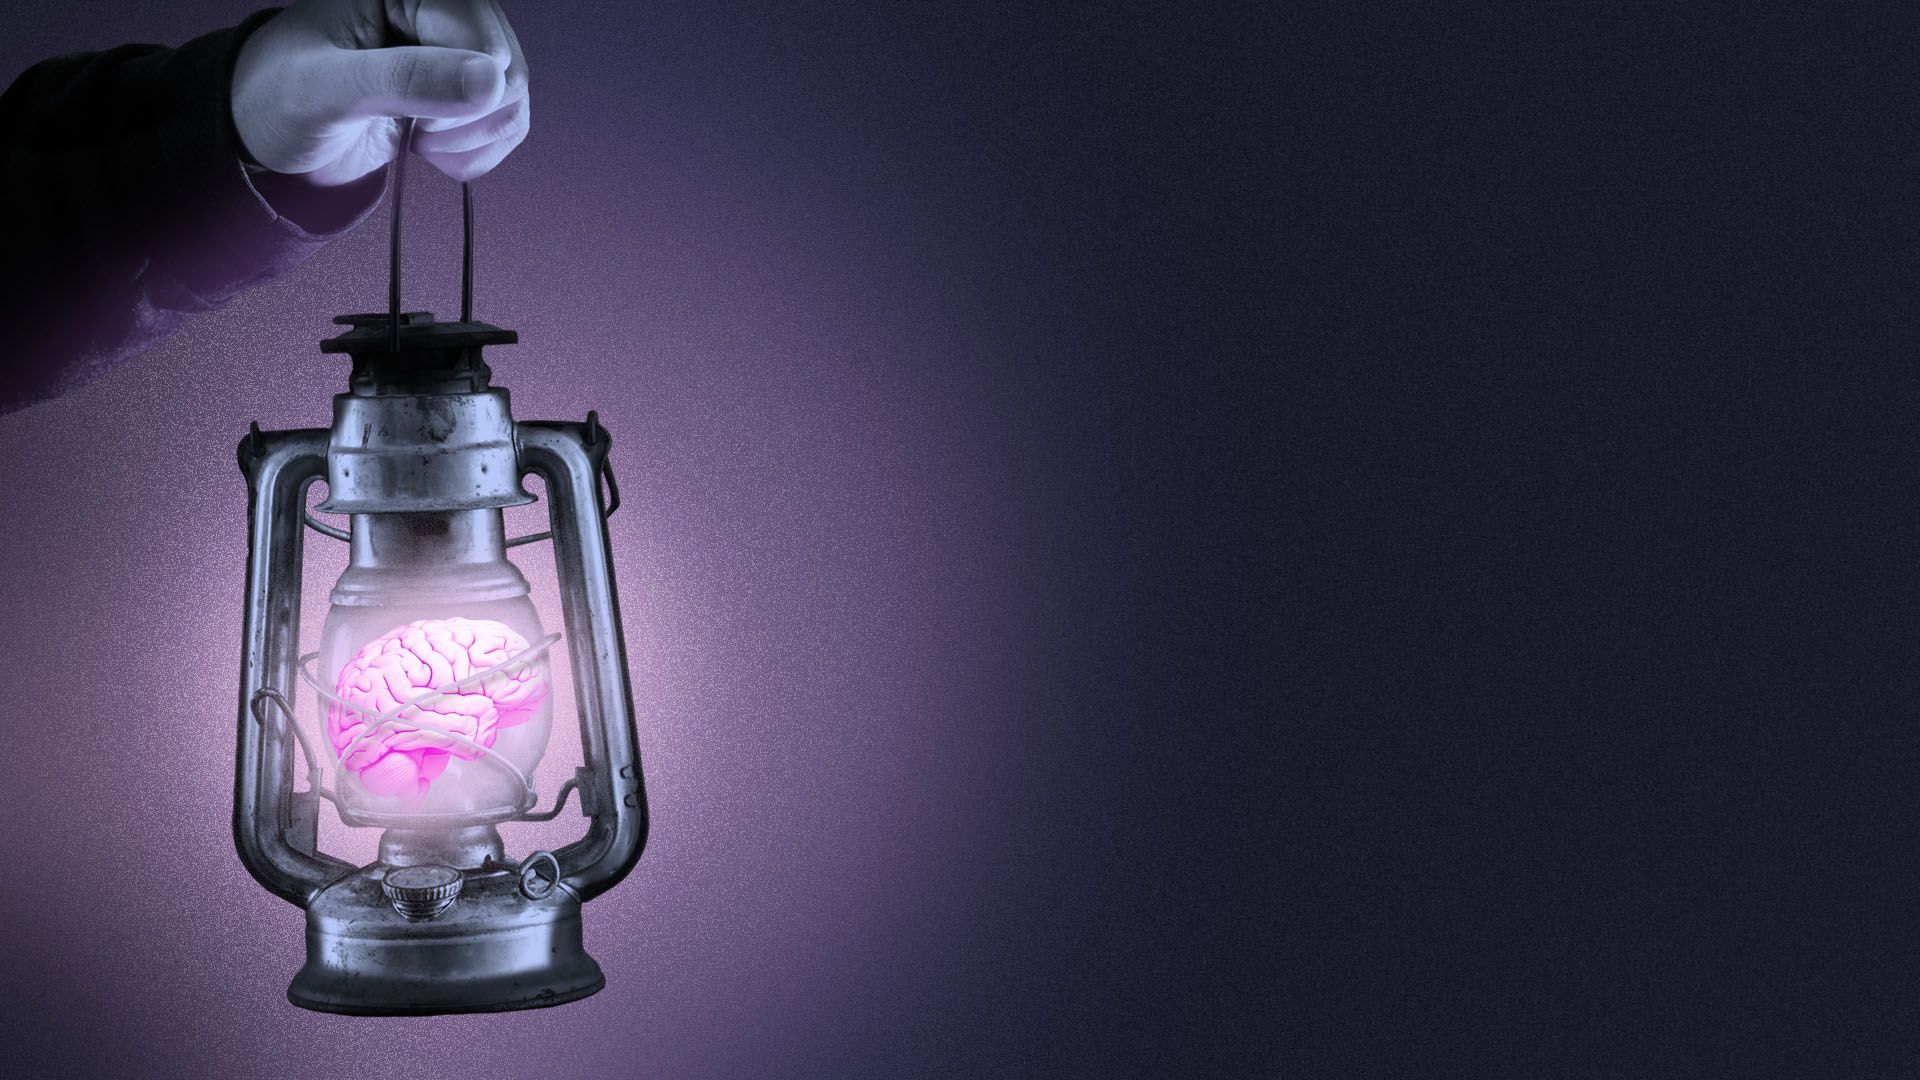 Illustration of someone holding up a lamp in the darkness with a glowing brain inside